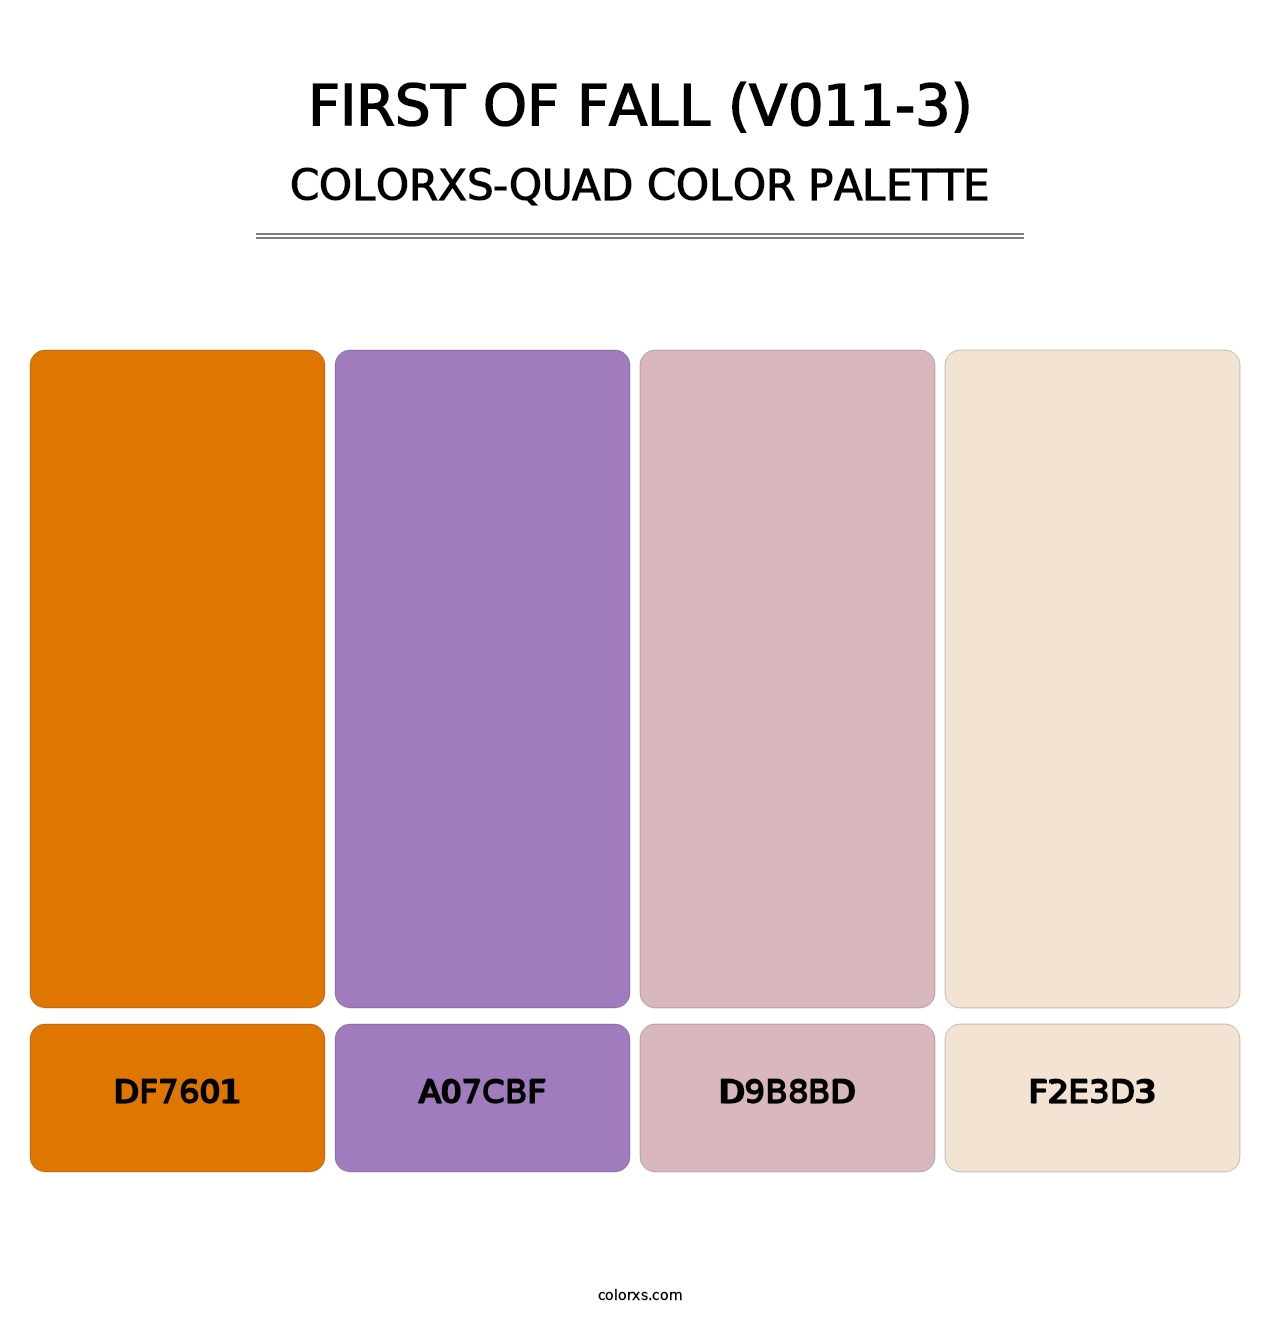 First of Fall (V011-3) - Colorxs Quad Palette